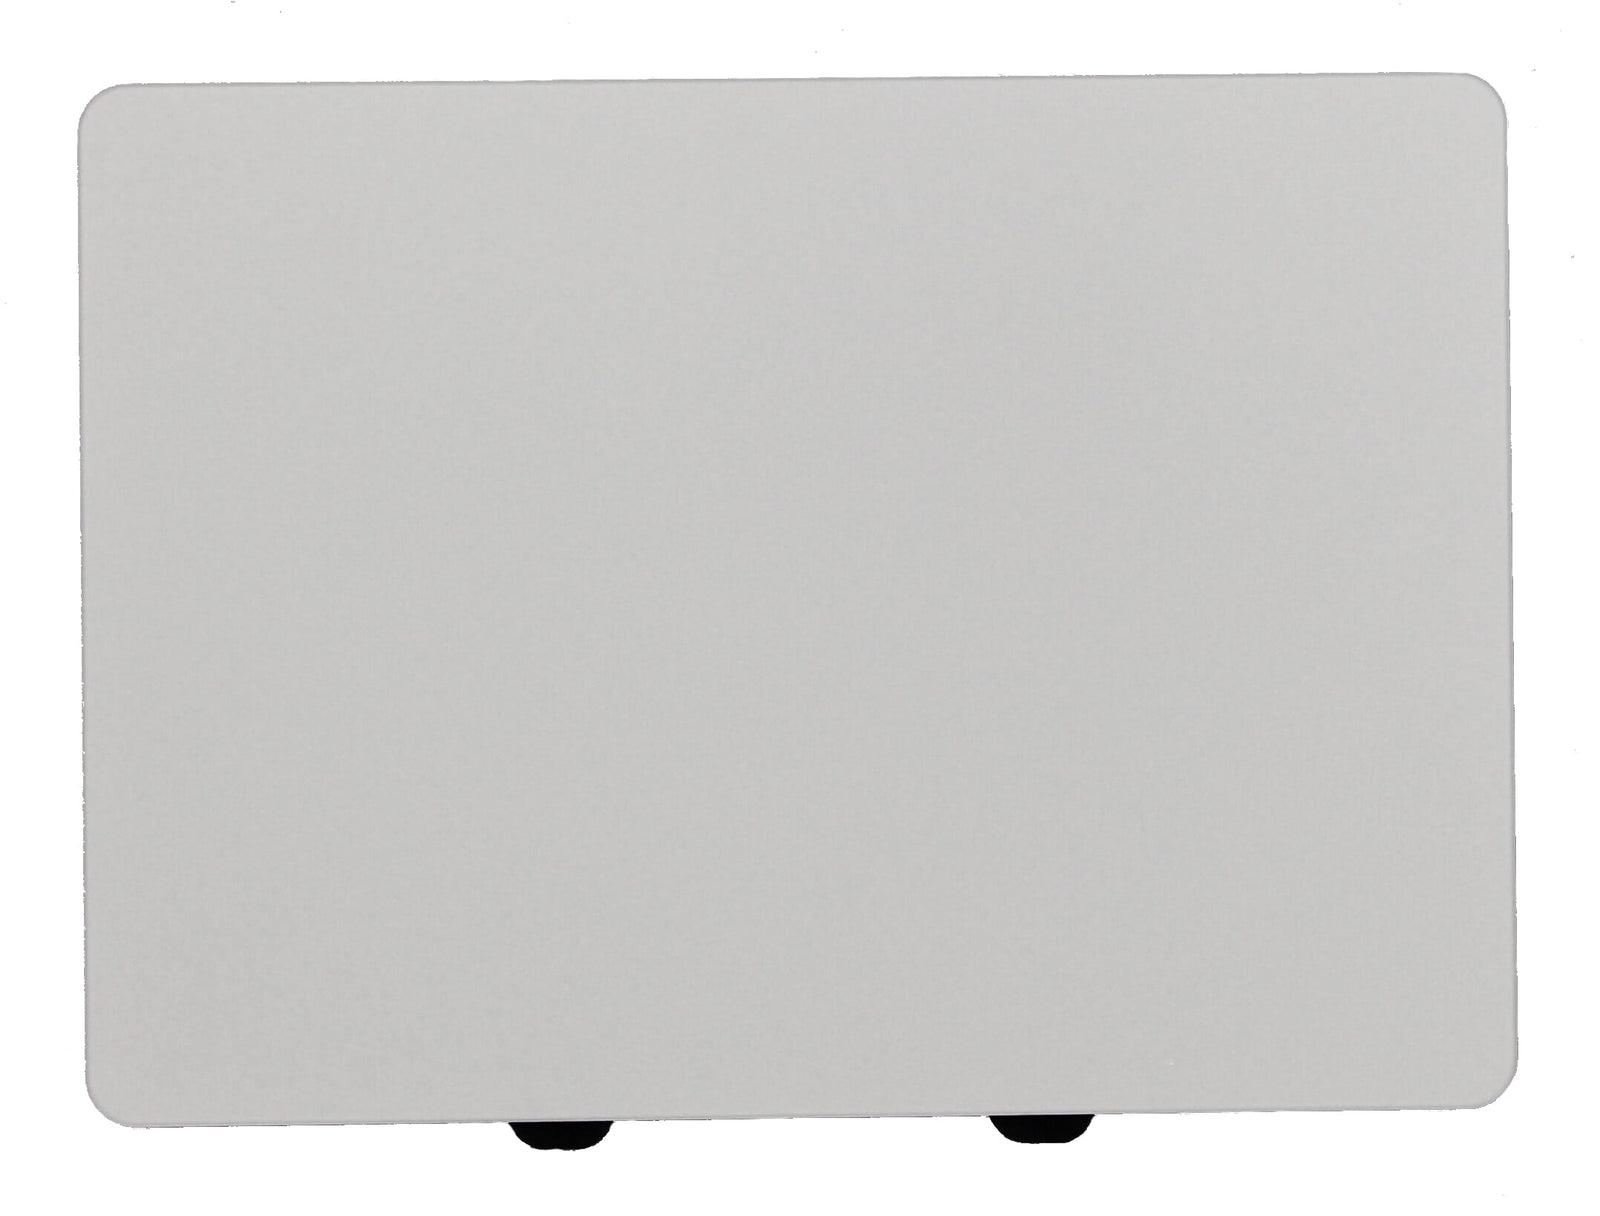 Replacement MacBook TrackPad A1278 A1286 (Early 2009 Mid 2012)